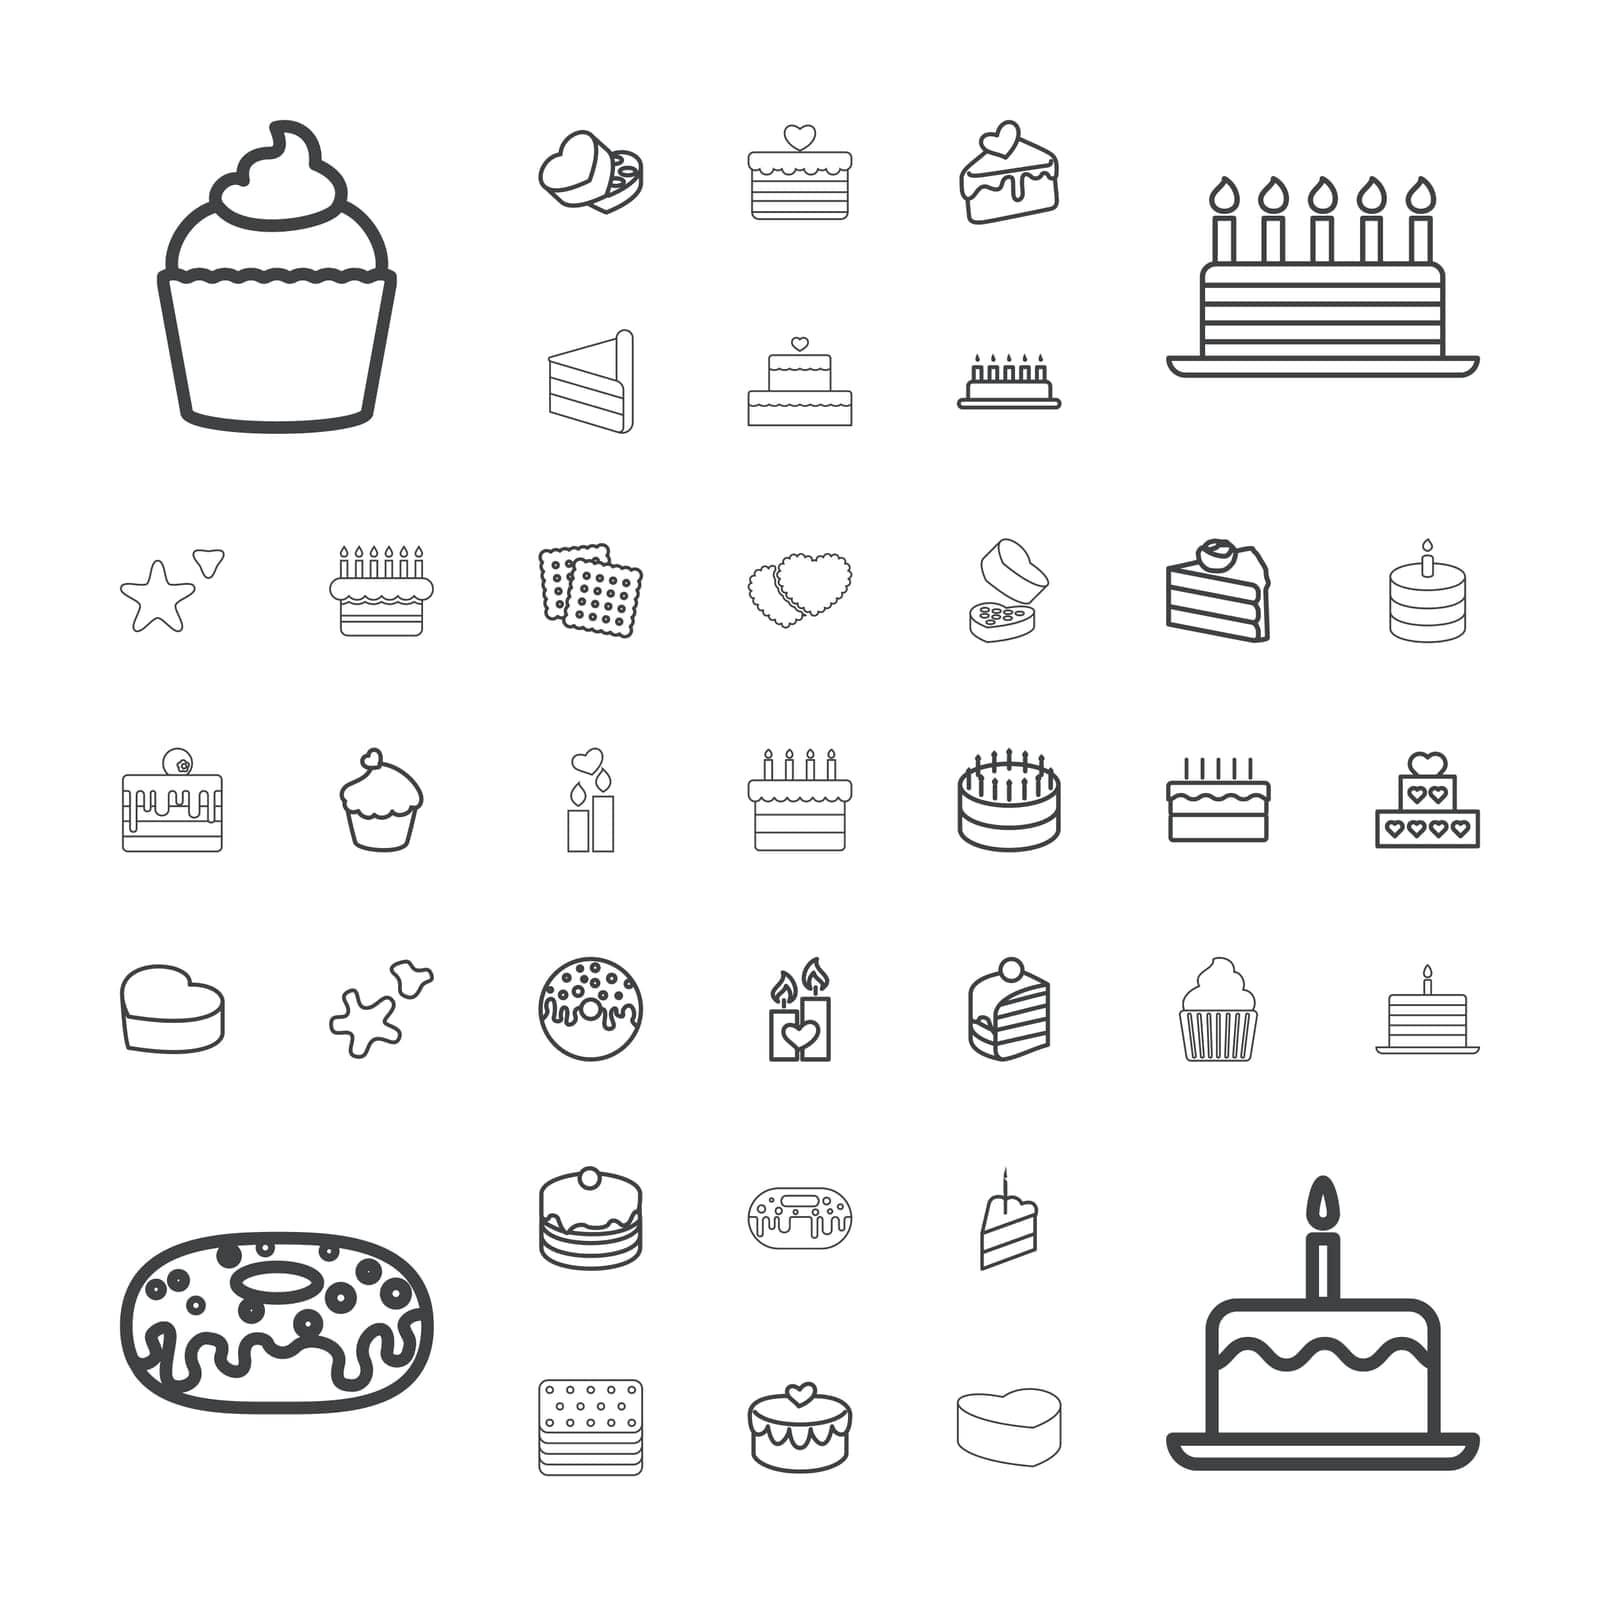 birthday,symbol,icon,sign,isolated,box,holiday,cookies,white,slice,cake,design,donut,of,lock,vector,decoration,graphic,set,cookie,bakery,one,delicious,muffin,food,heart,with,celebration,traditional,dessert,piece,background,candle,illustration,sweet,cupcake